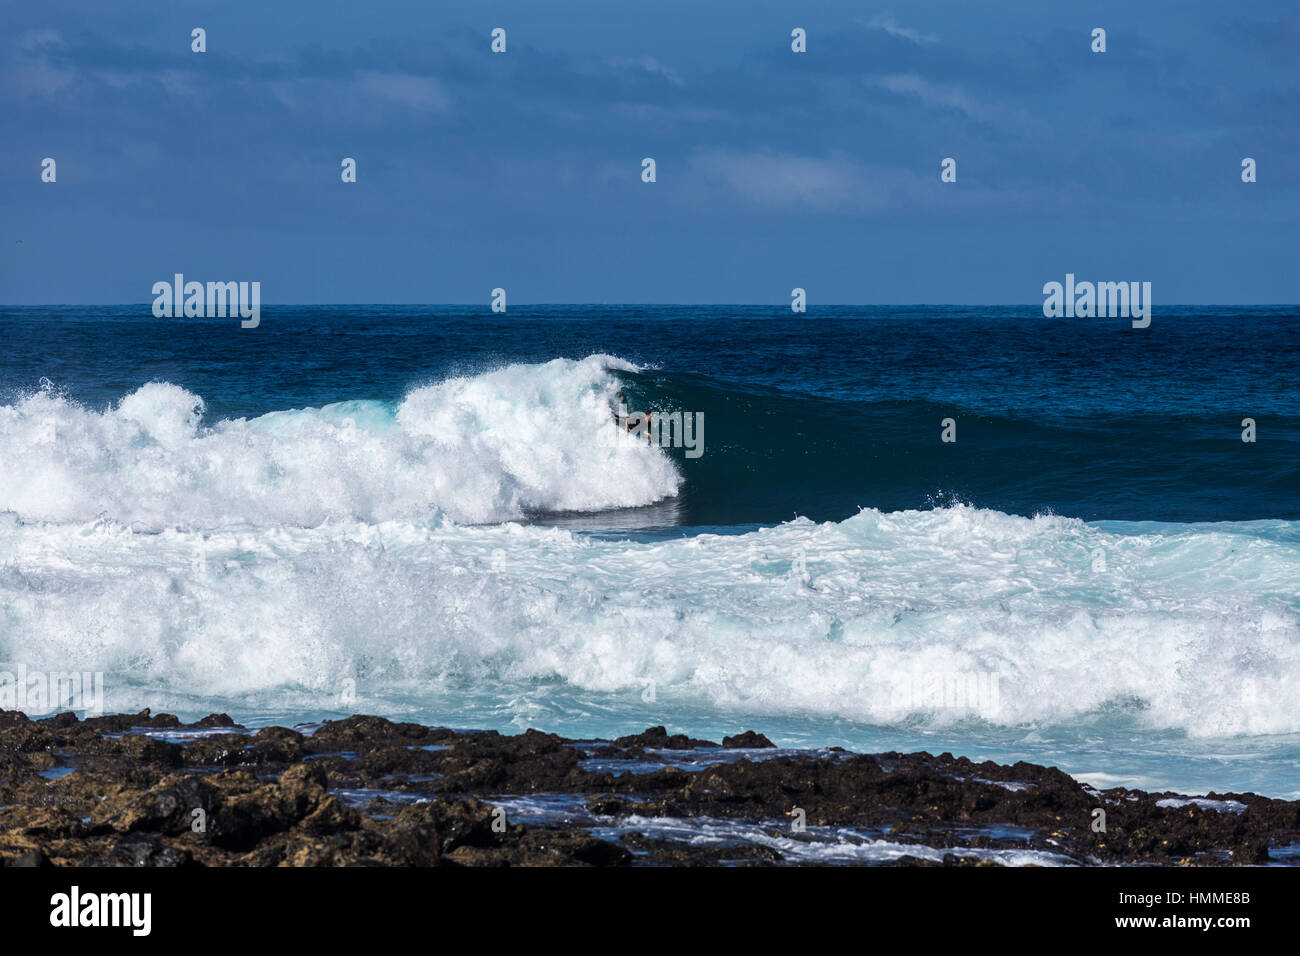 Bodyboarders at Punta Blanca in high waves on the west coast of Tenerife, Canary Islands, Spain Stock Photo